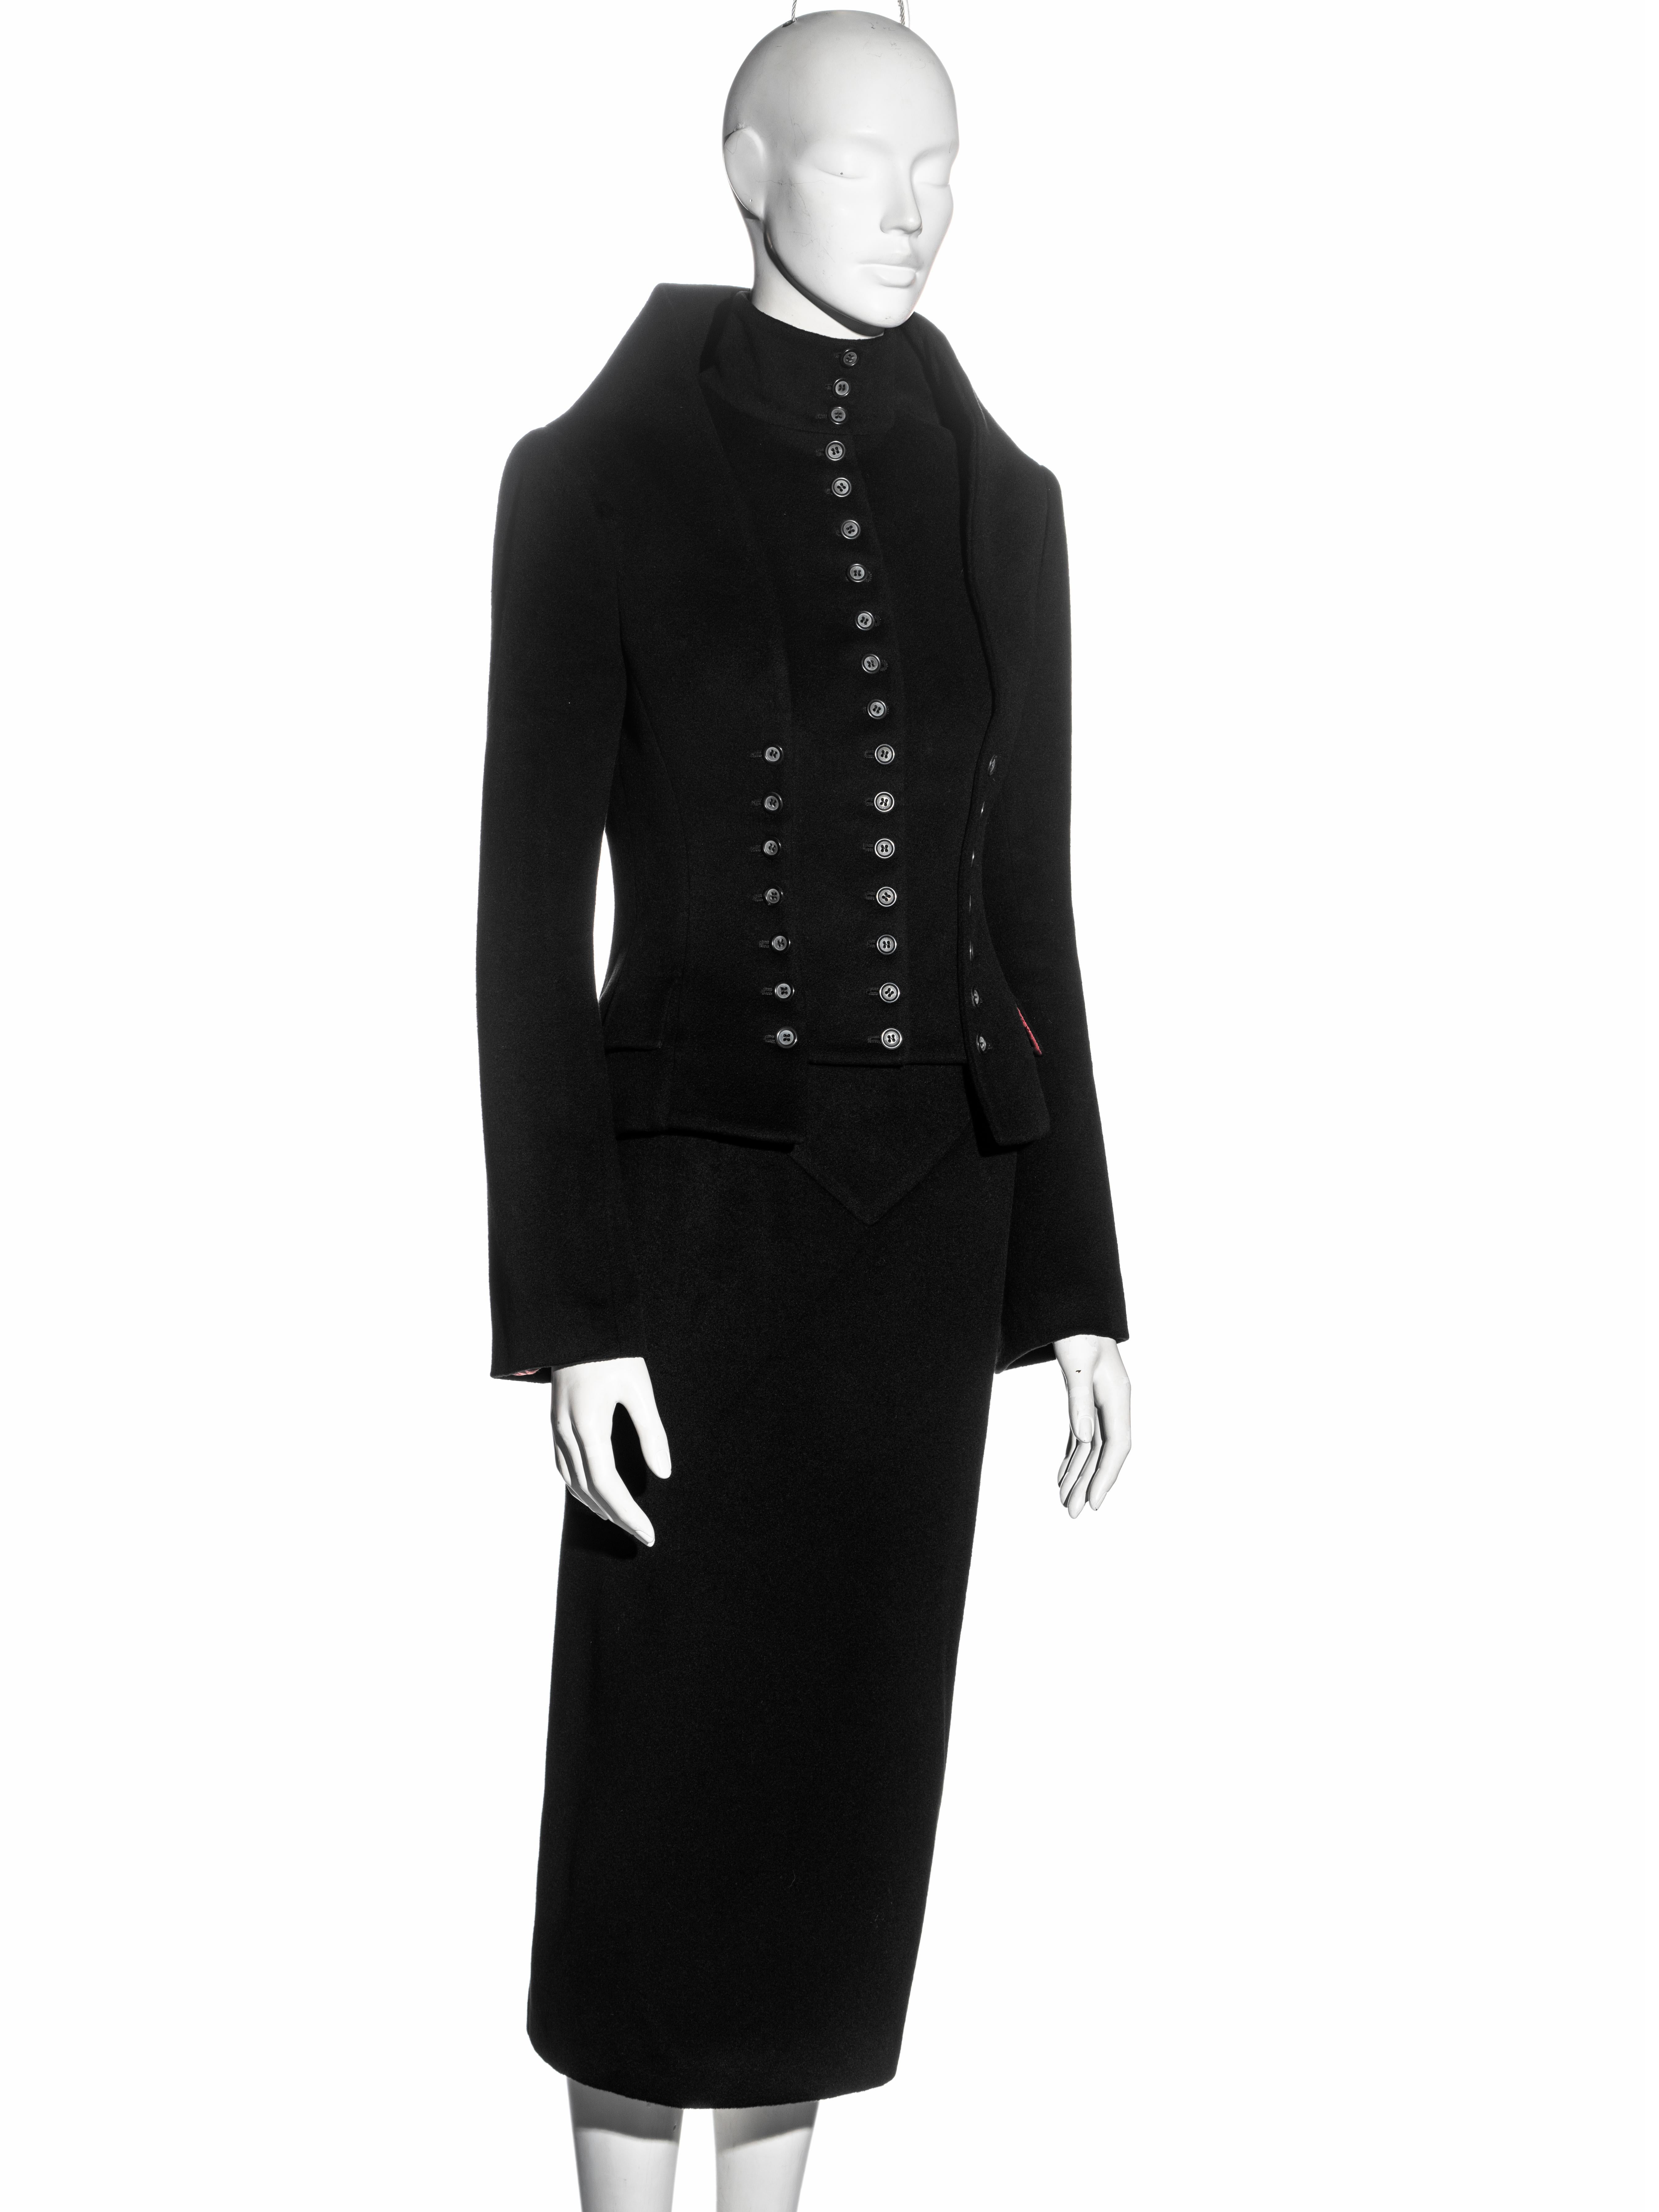 Alexander McQueen black cashmere 'Joan' jacket and skirt suit, fw 1998 For Sale 1